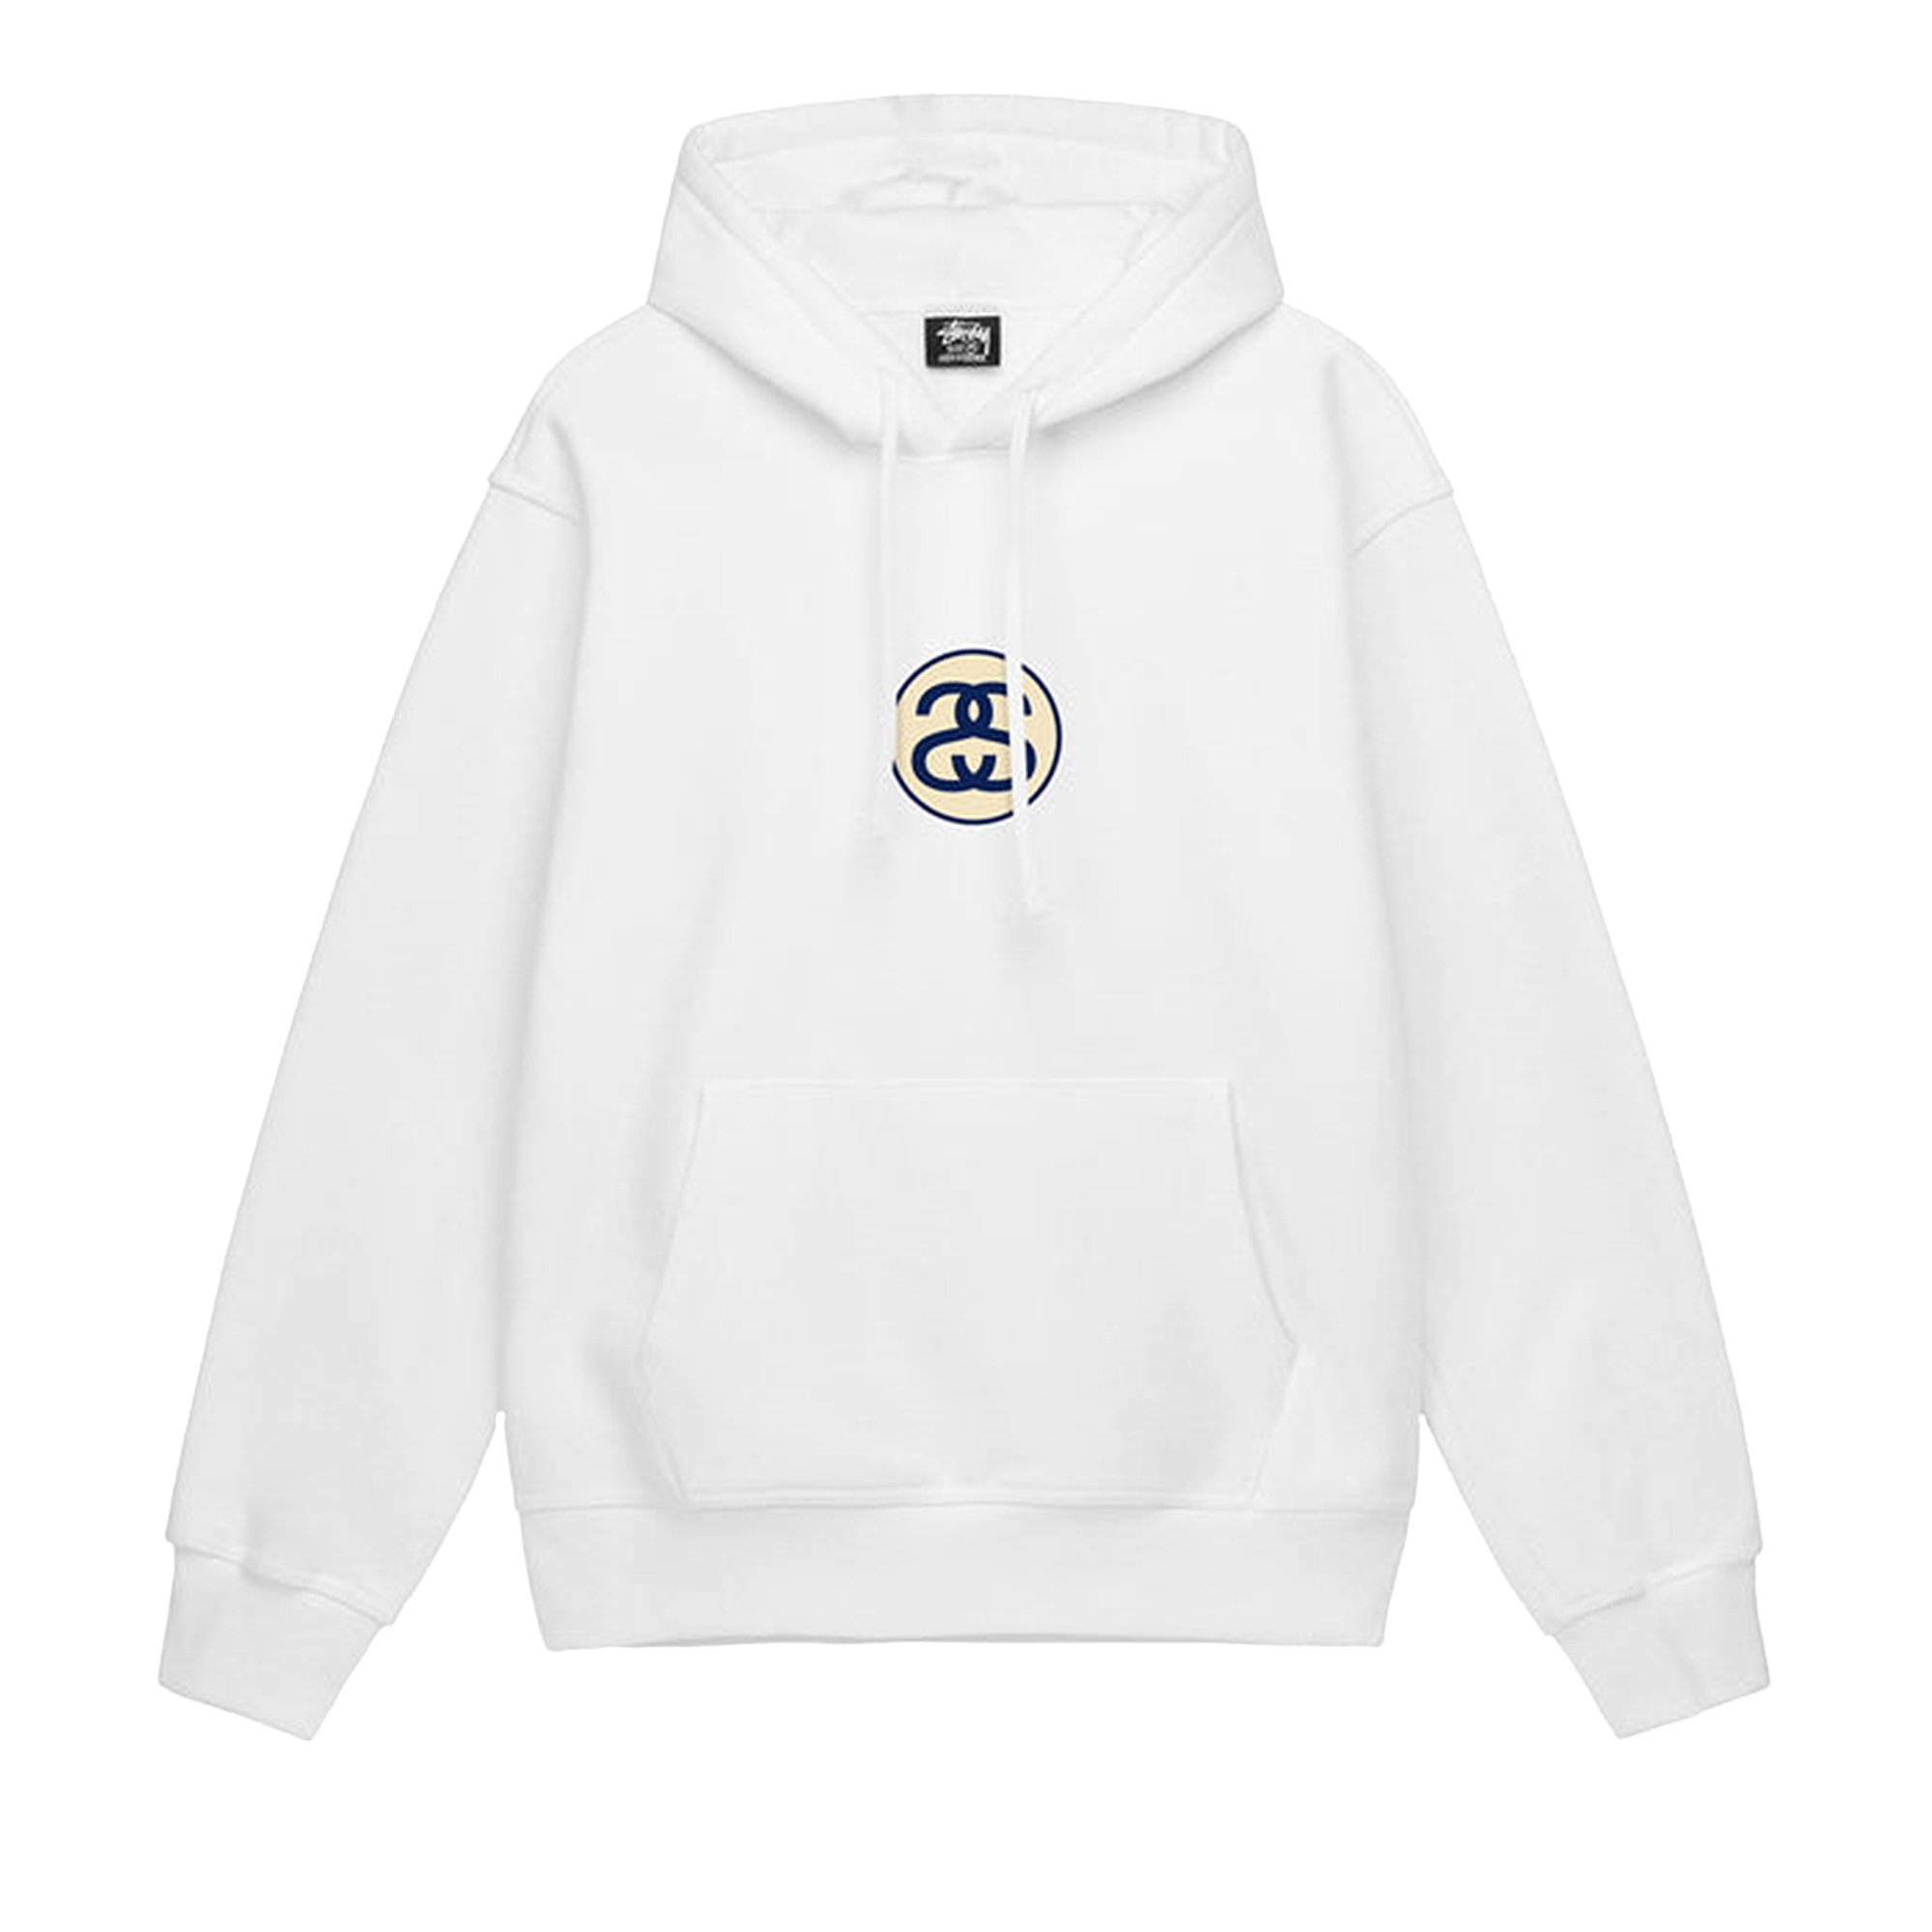 Buy Stussy SS-Link Hoodie 'White' - 1924825 WHIT | GOAT